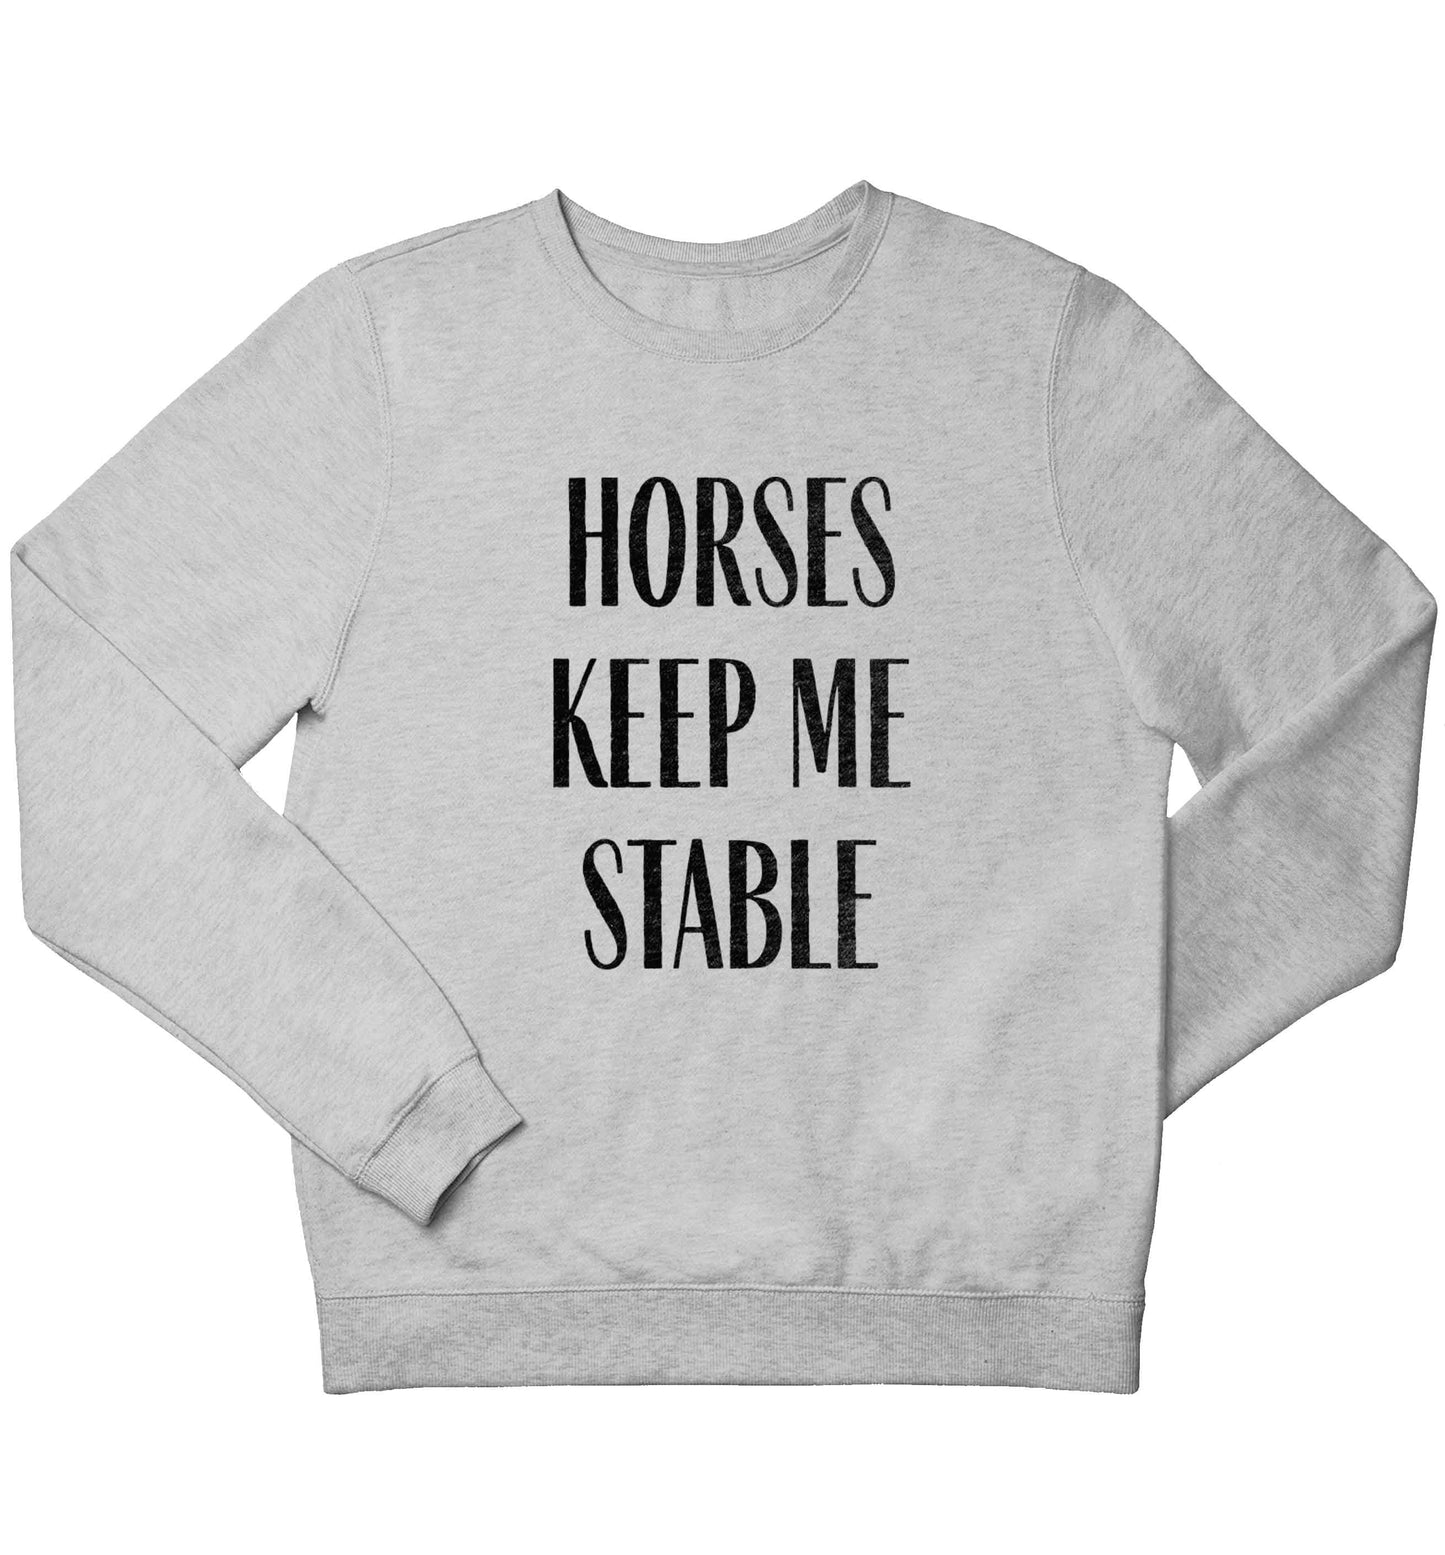 Horses keep me stable children's grey sweater 12-13 Years